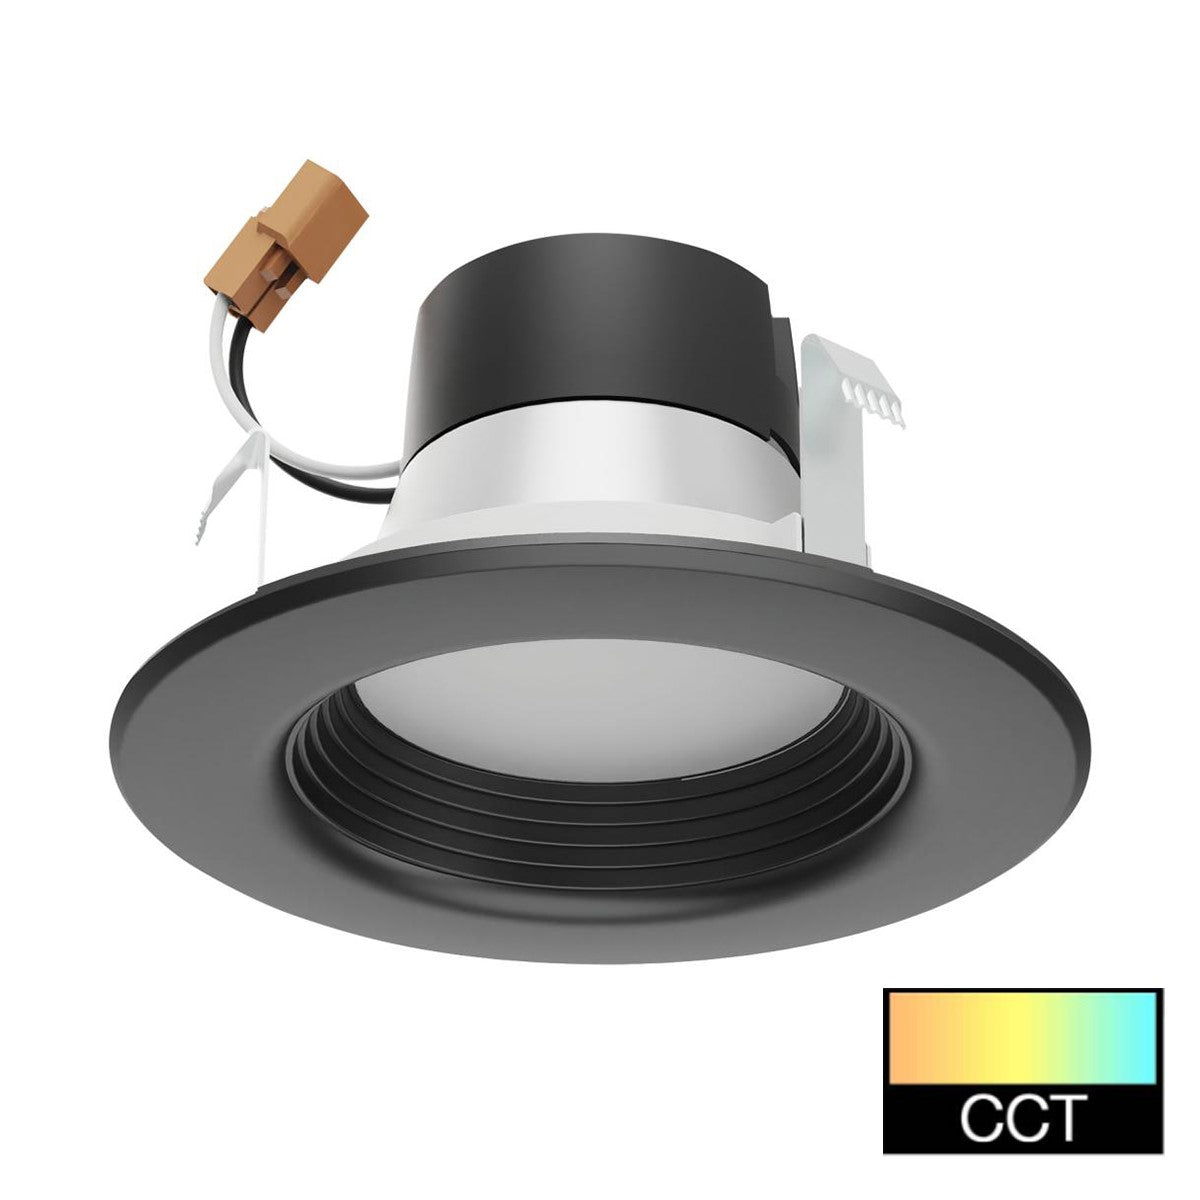 4 Inch Recessed LED Can Light, Round, 7 Watt, 600 Lumens, Selectable CCT, 2700K to 5000K, Balck Finish